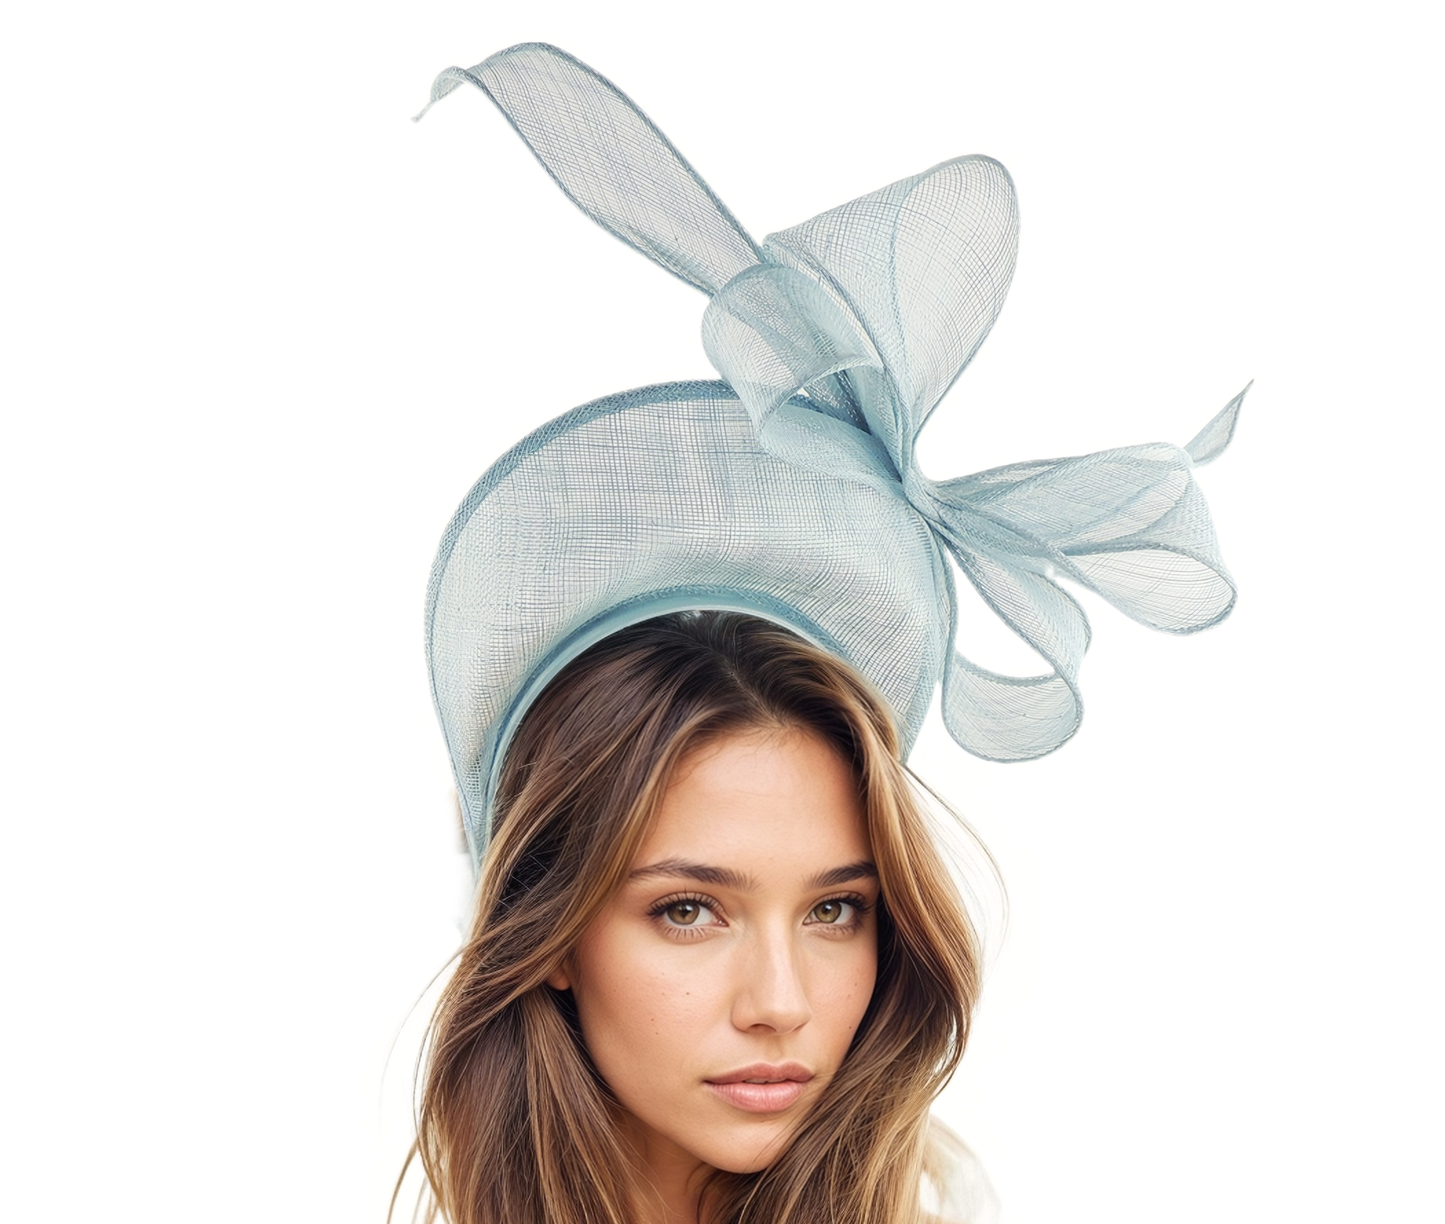 Nora Large Bow Wedding Race Day Halo Crown Fascinator